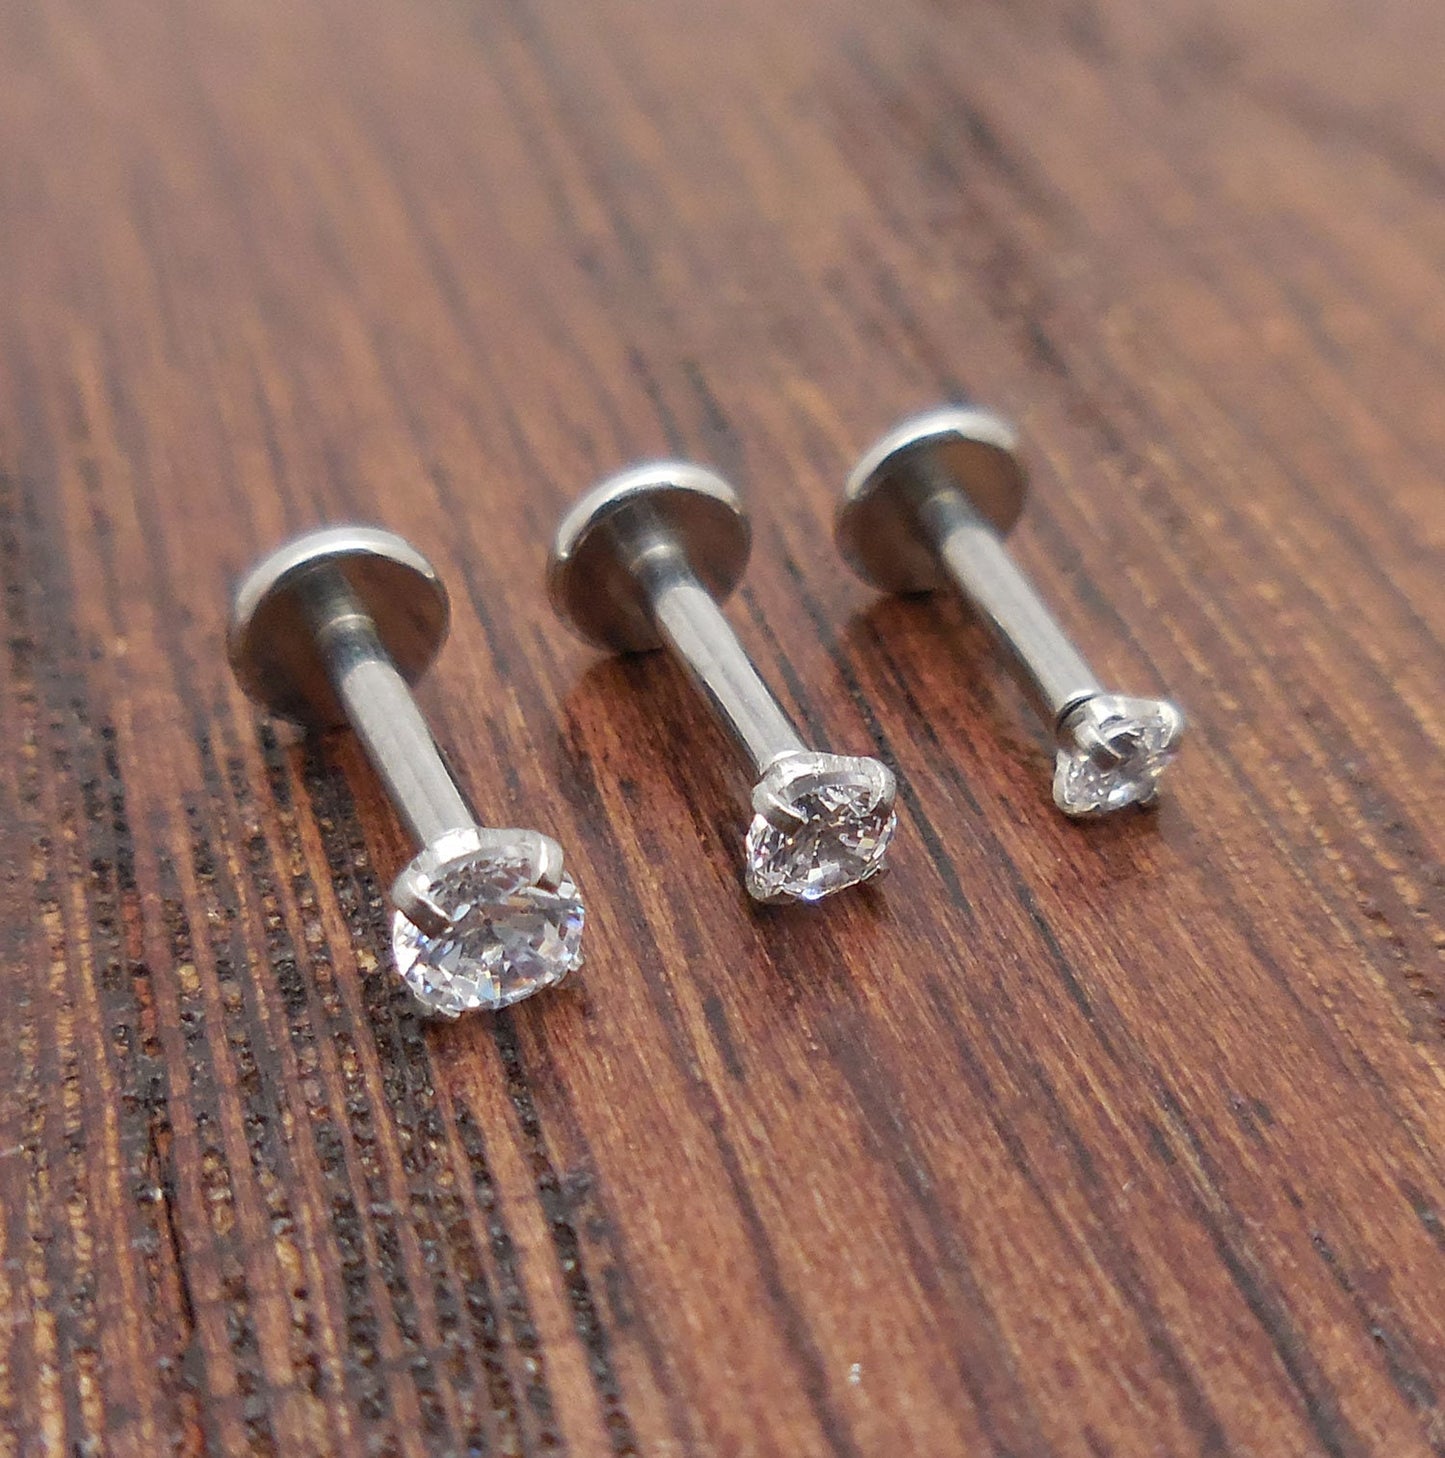 16g 2-4mm Tragus 5mm-6mm-8mm Threadless Push Pin Labret Triple Forward Helix Nose Ring Cartilage Earrings Stainless Prong Set Clear CZ Stone